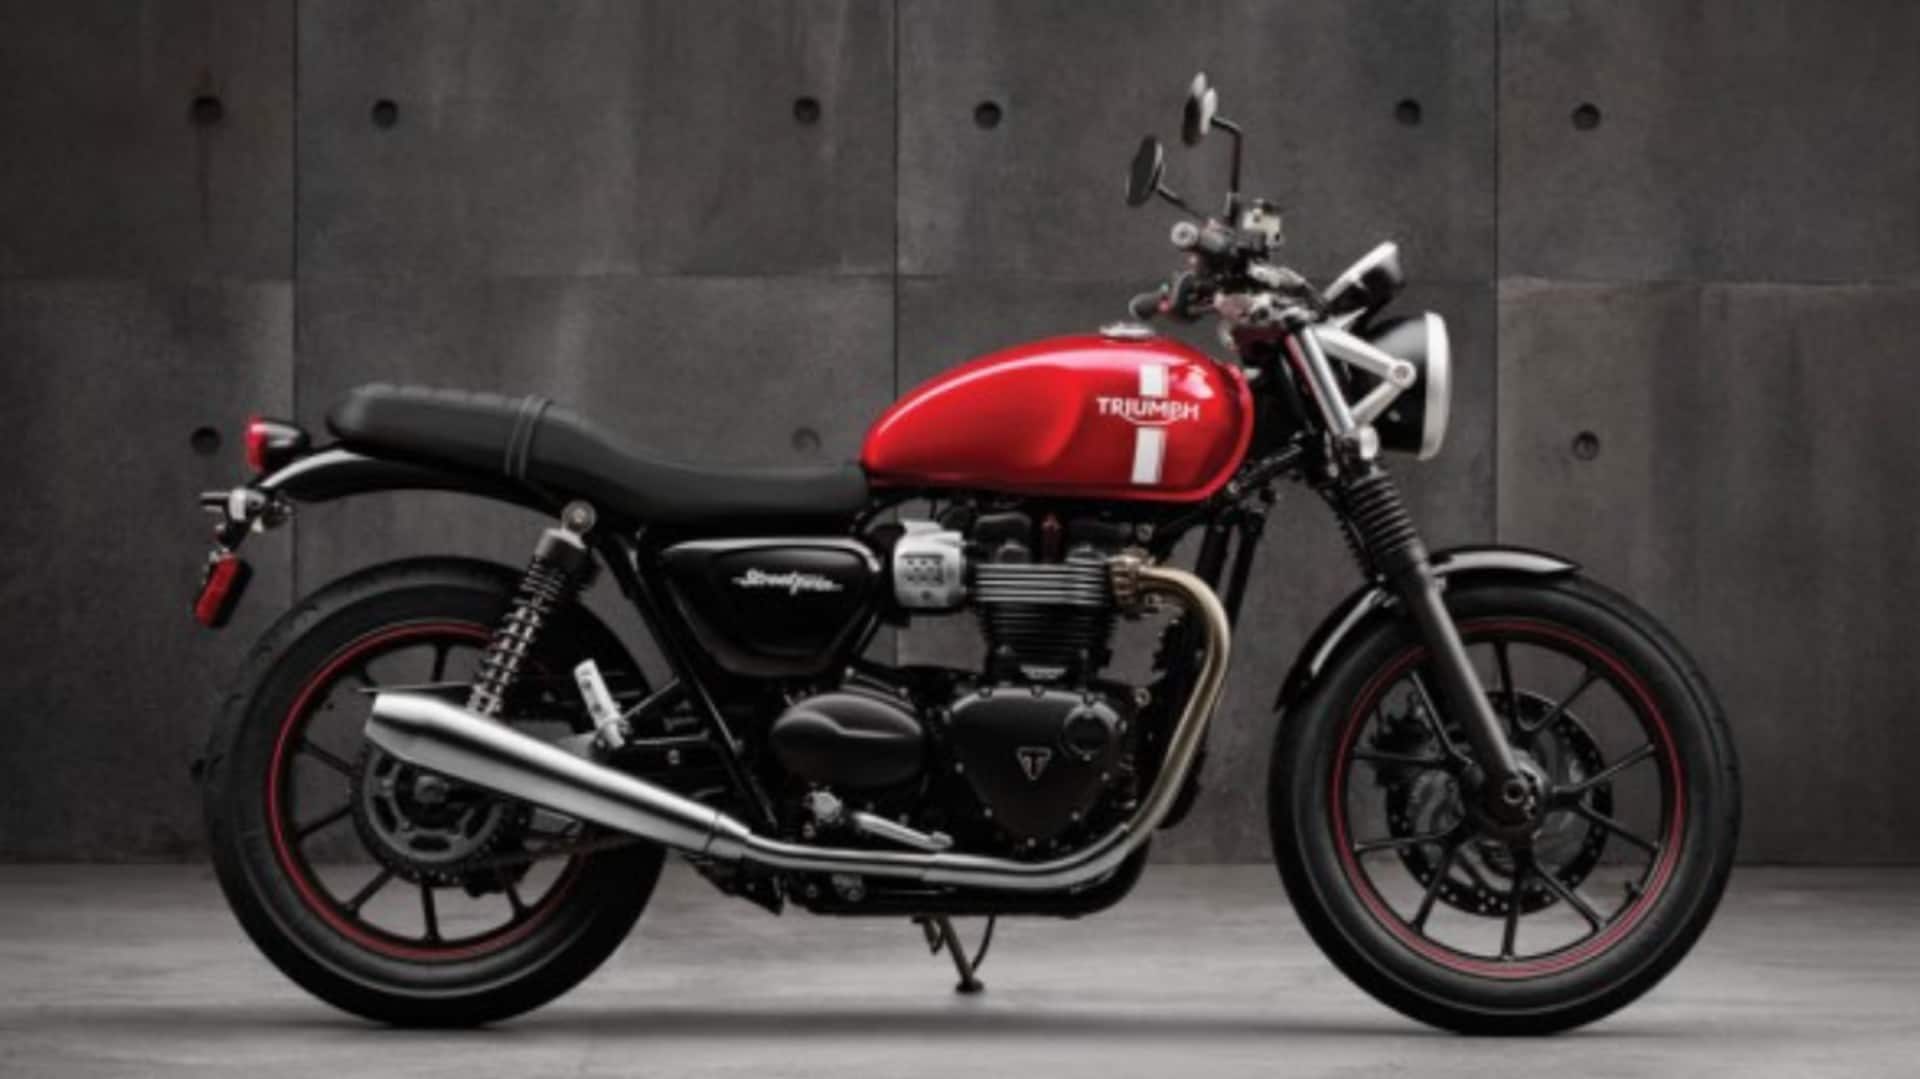 What to expect from upcoming Bajaj-Triumph scrambler motorcycle